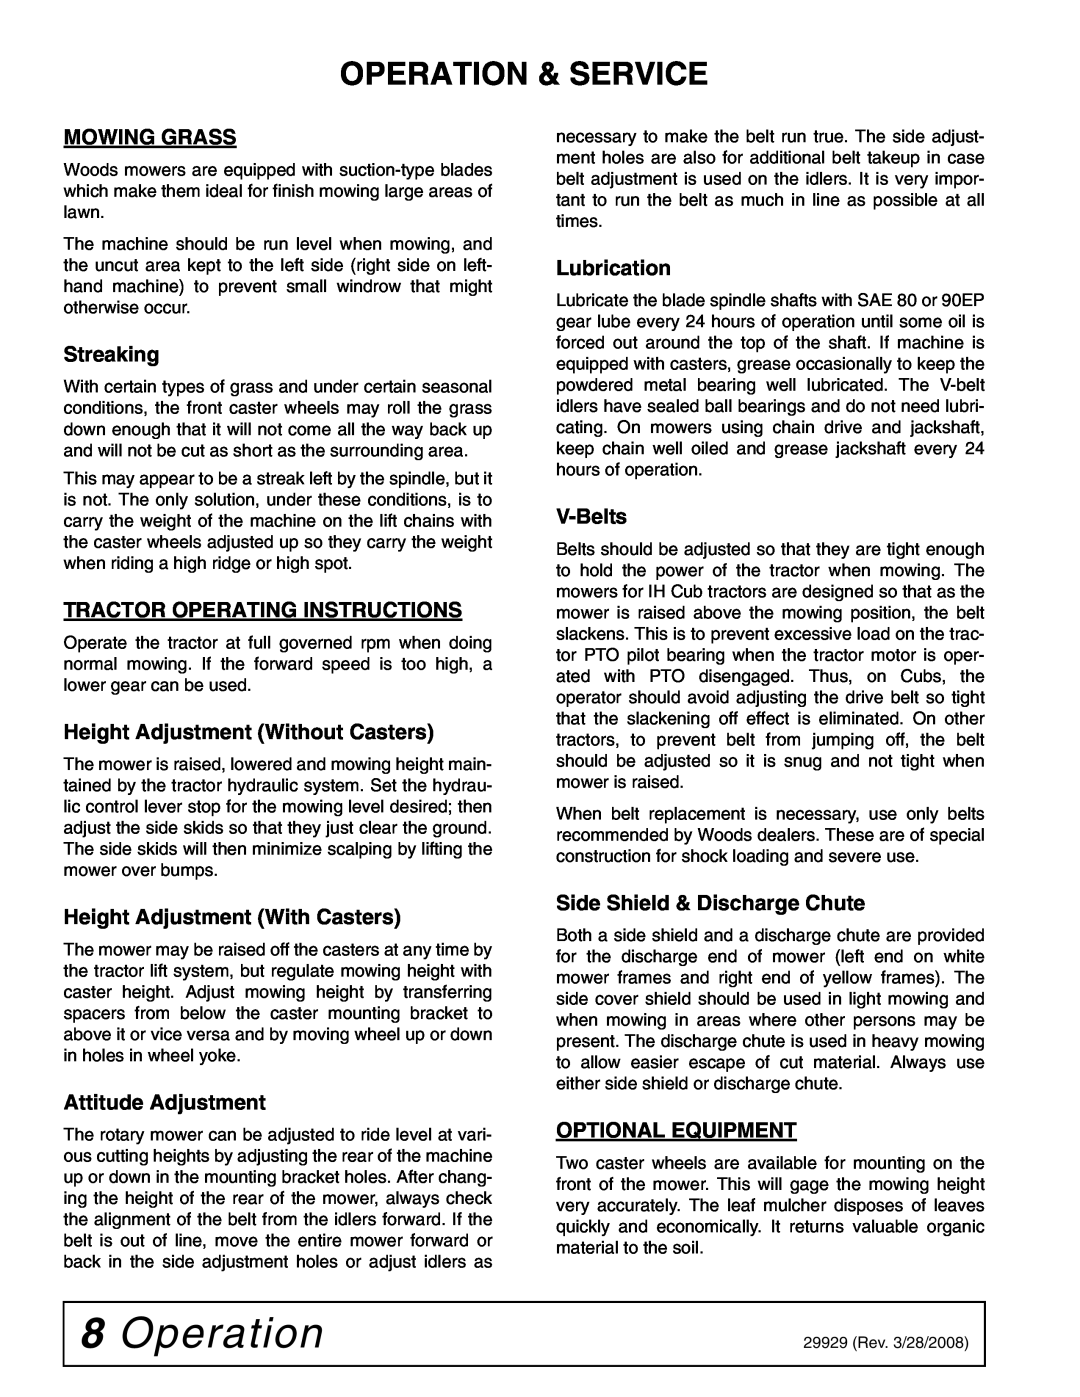 Woods Equipment 59CLF-4 Operation & Service, Mowing Grass, Streaking, Tractor Operating Instructions, Lubrication 